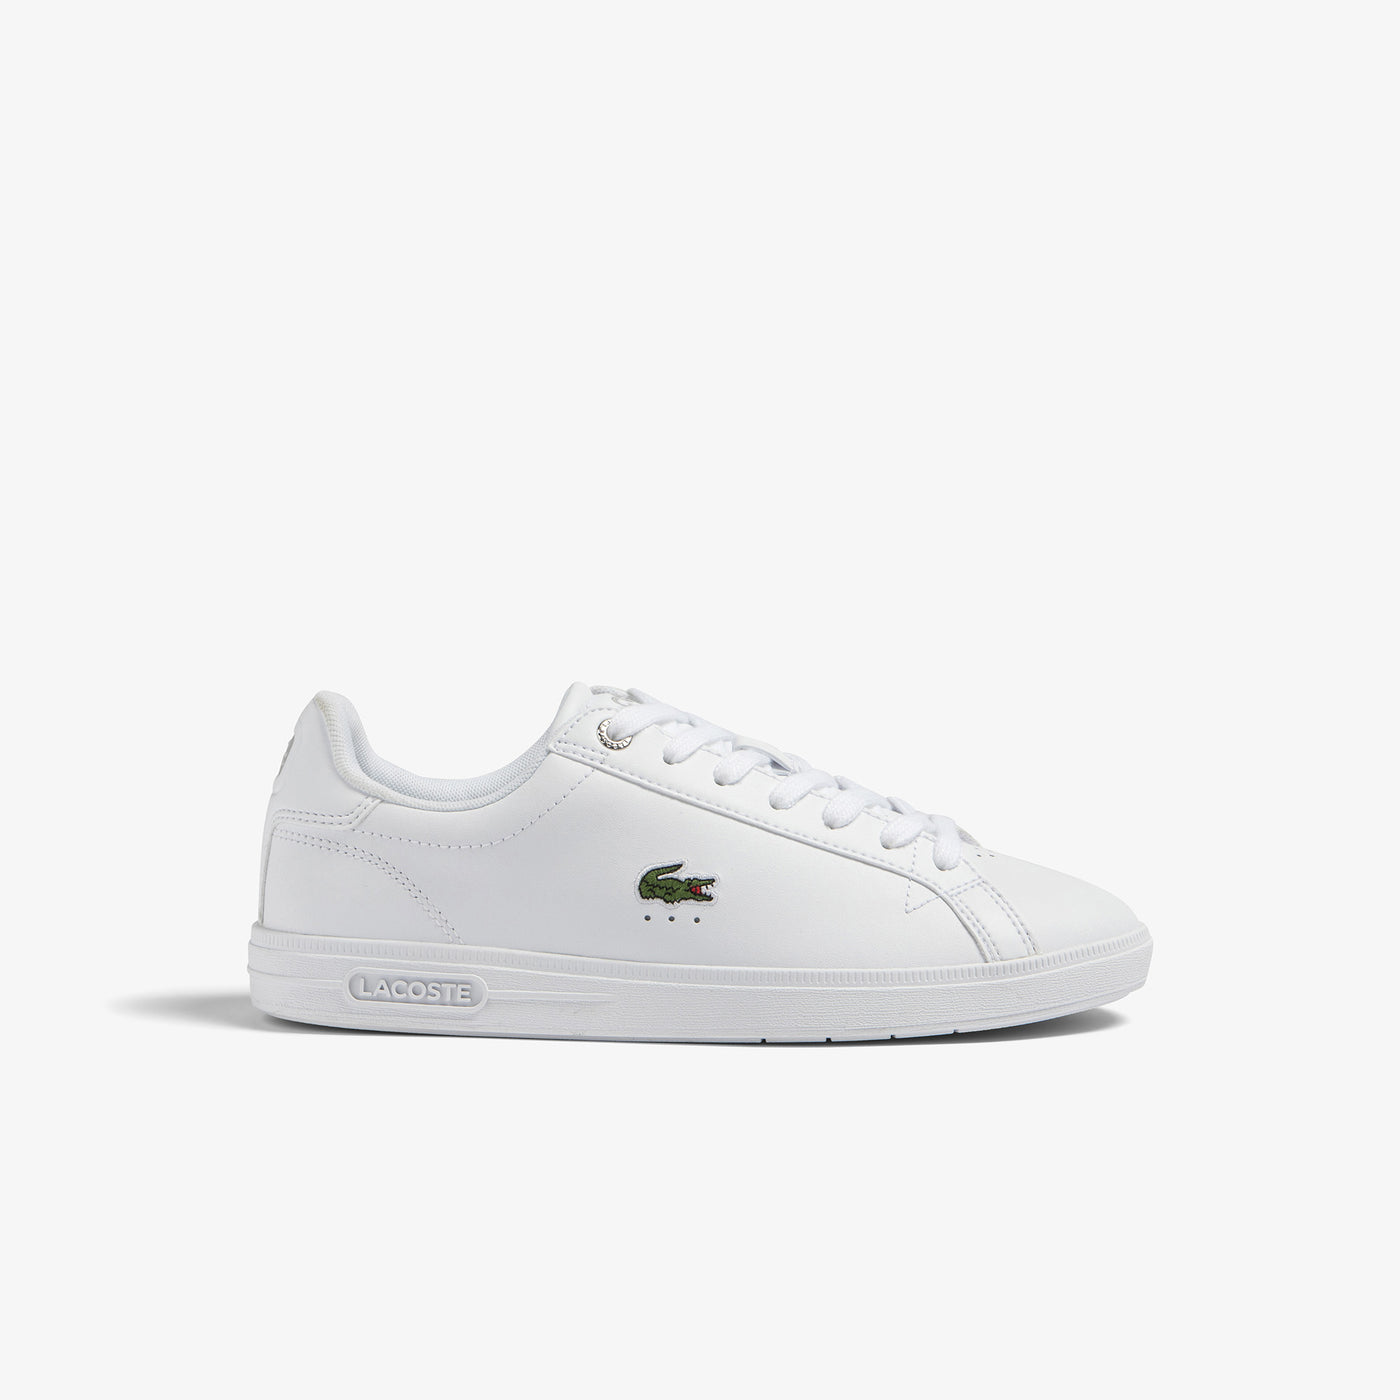 Shop The Latest Collection Of Lacoste Women'S Lacoste Graduate Pro Leather Trainers - 45Sfa008521G In Lebanon